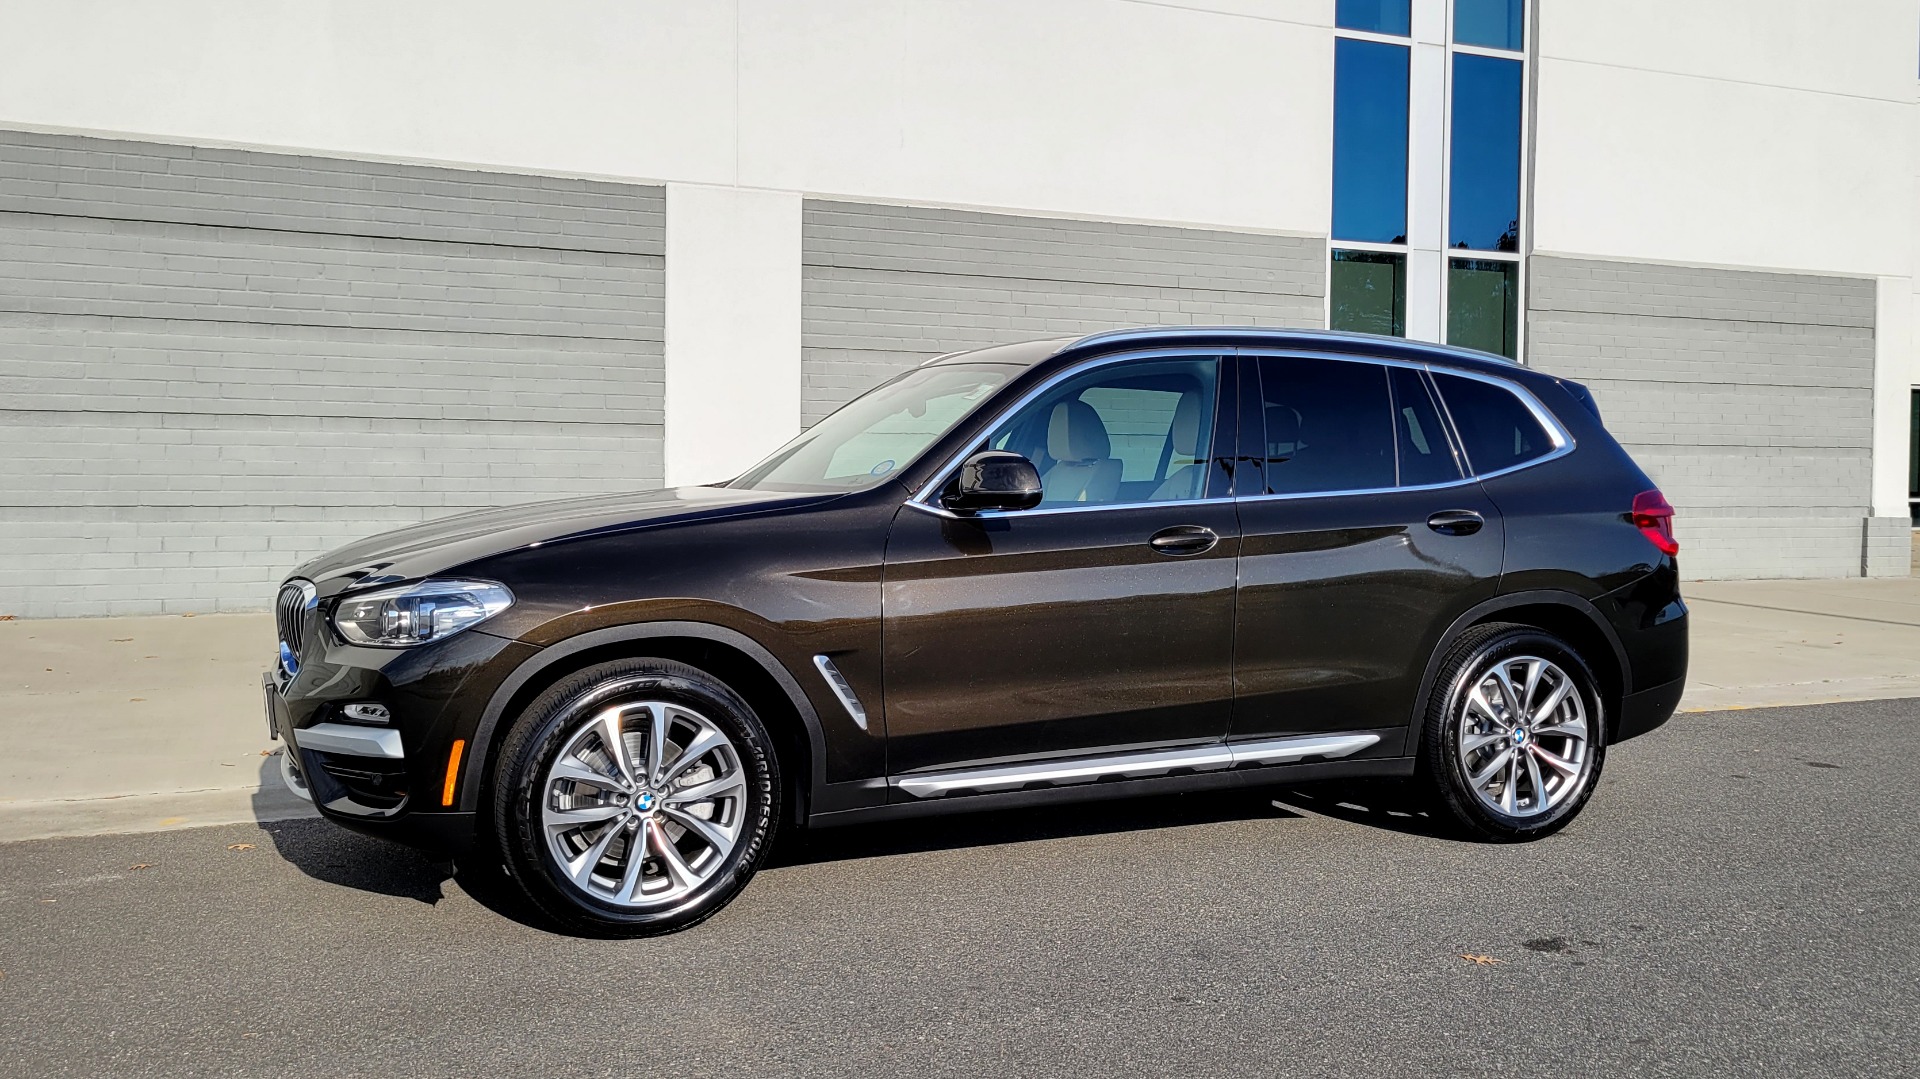 Used 2019 BMW X3 XDRIVE30I 2.0L SUV / NAV / PANO-ROOF / DRVR ASST / HTD STS / REARVIEW for sale $40,595 at Formula Imports in Charlotte NC 28227 3